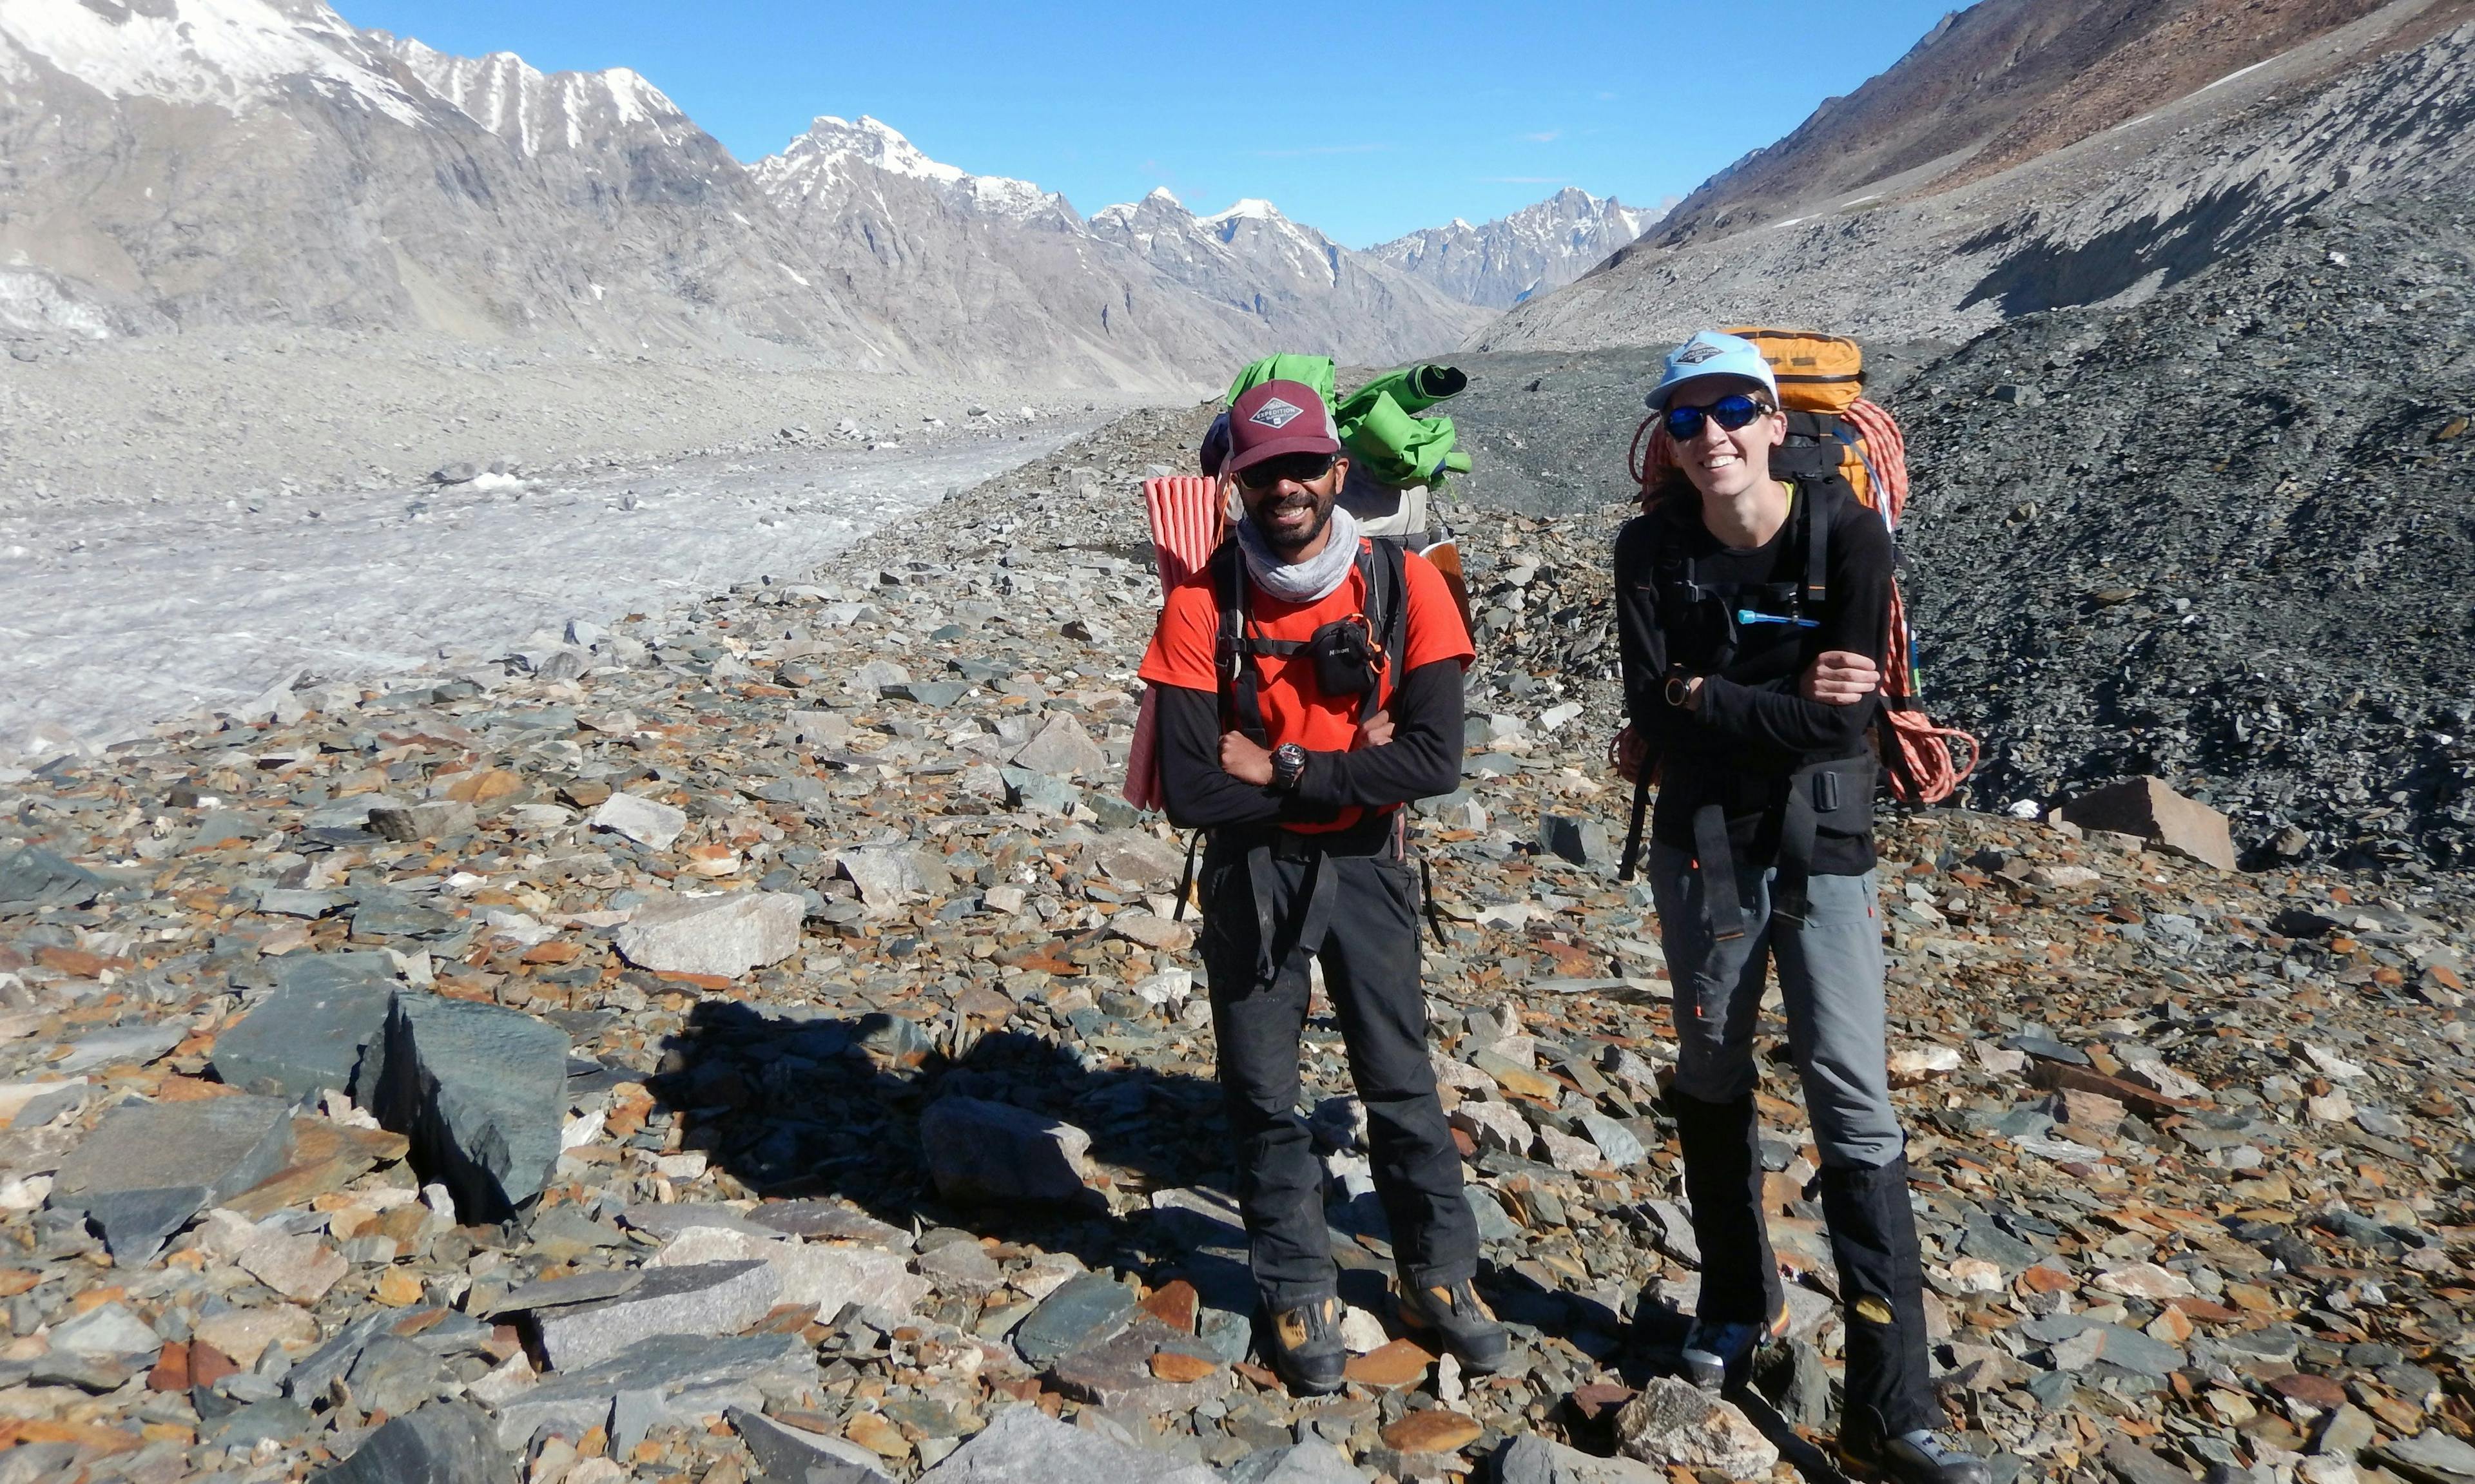 Two climbers wearing backpacks and standing on shale with mountains in the background.